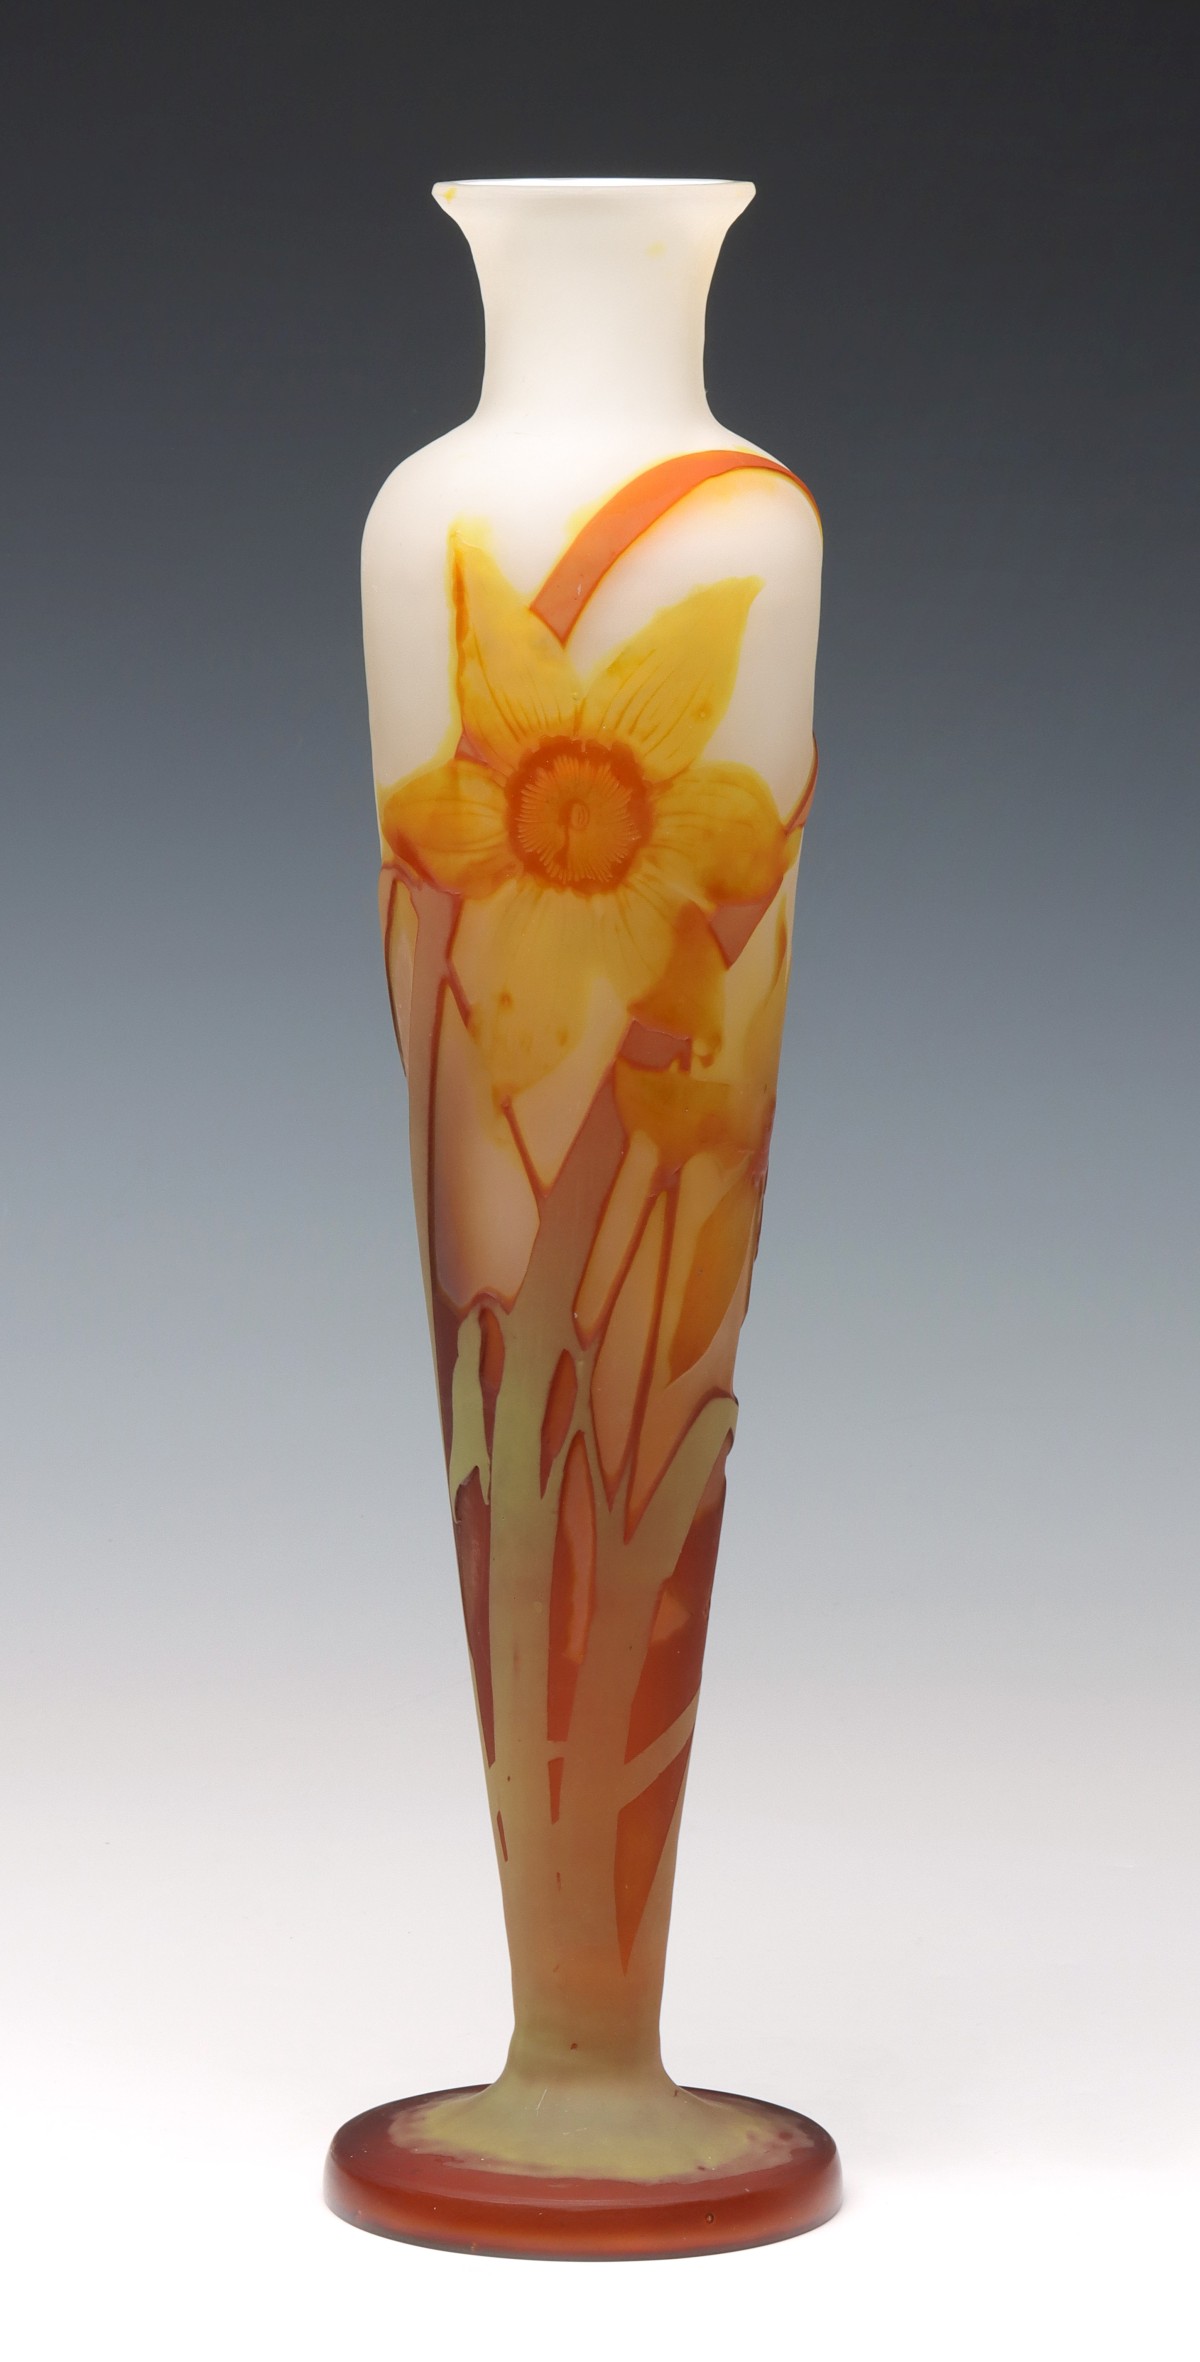 A FRENCH CAMEO GLASS VASE WITH DAFFODILS SIGNED GALLÃ‰